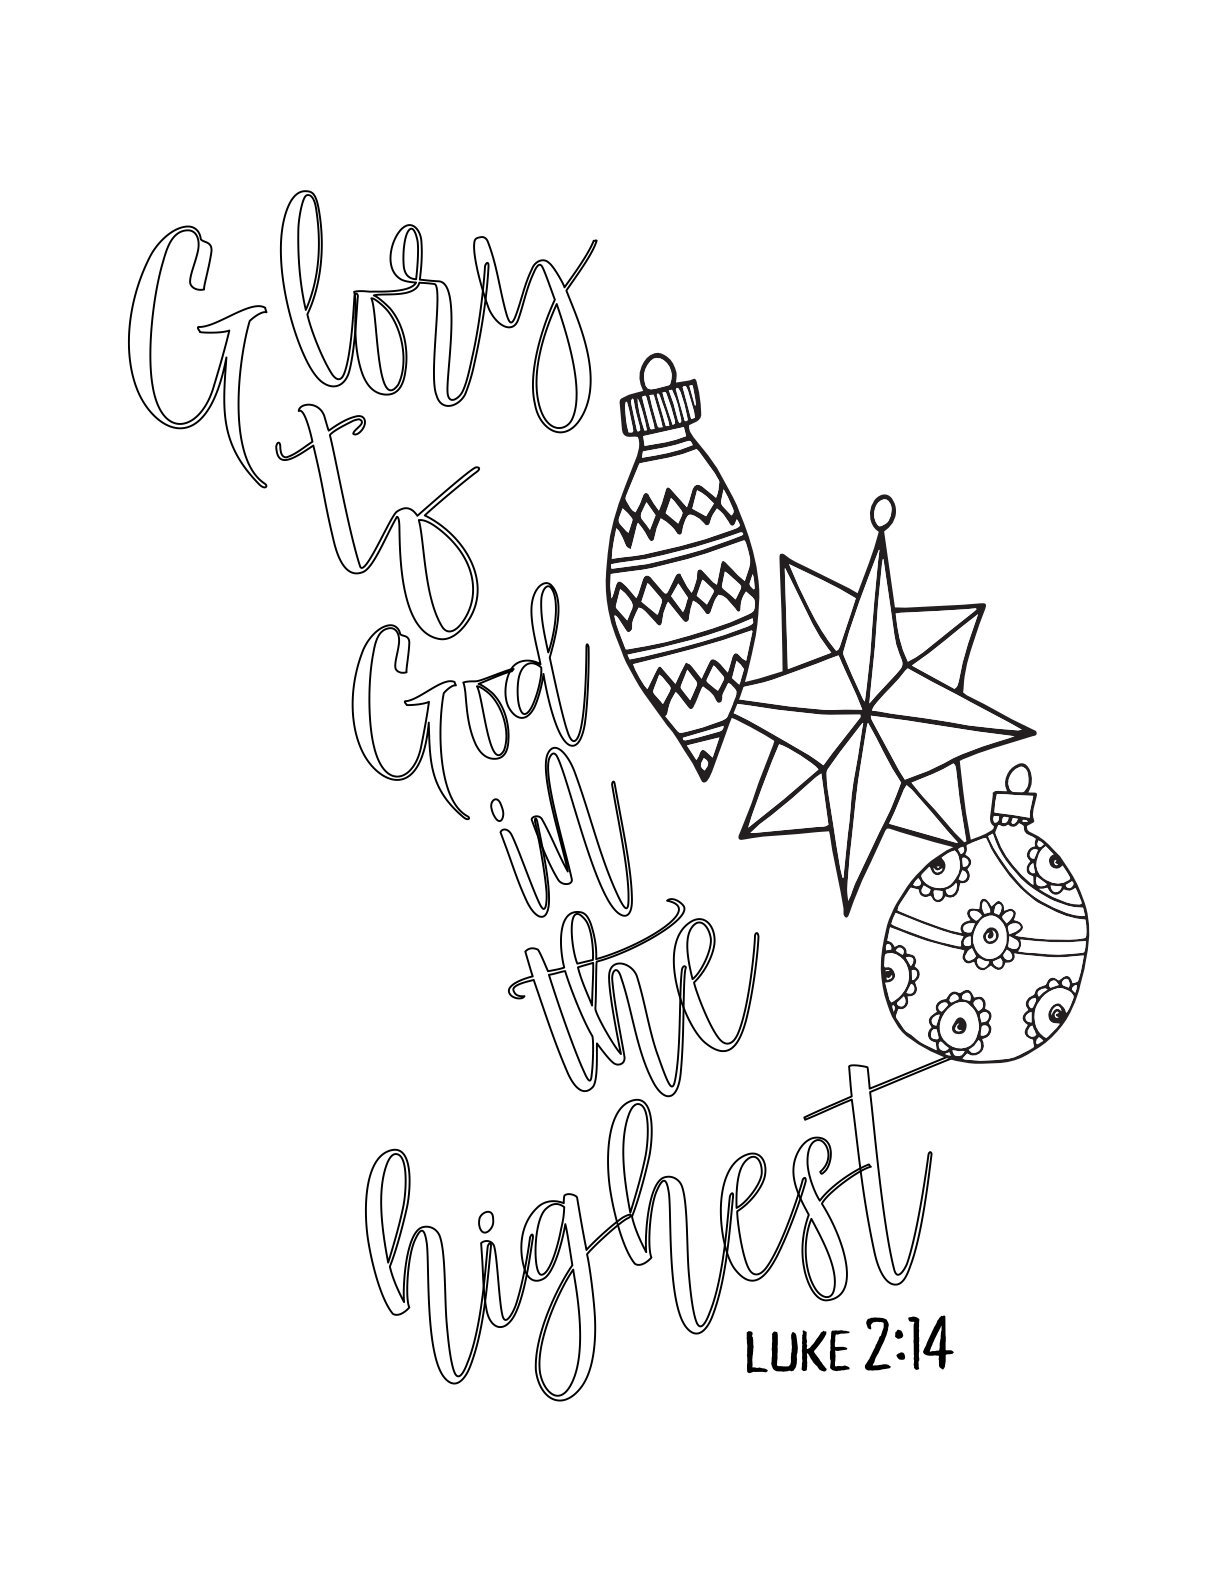 Free Christmas Advent Coloring Page - Glory To God In The Highest - Luke 2:14 CLICK HERE TO DOWNLOAD YOUR FREE COLORING SHEET